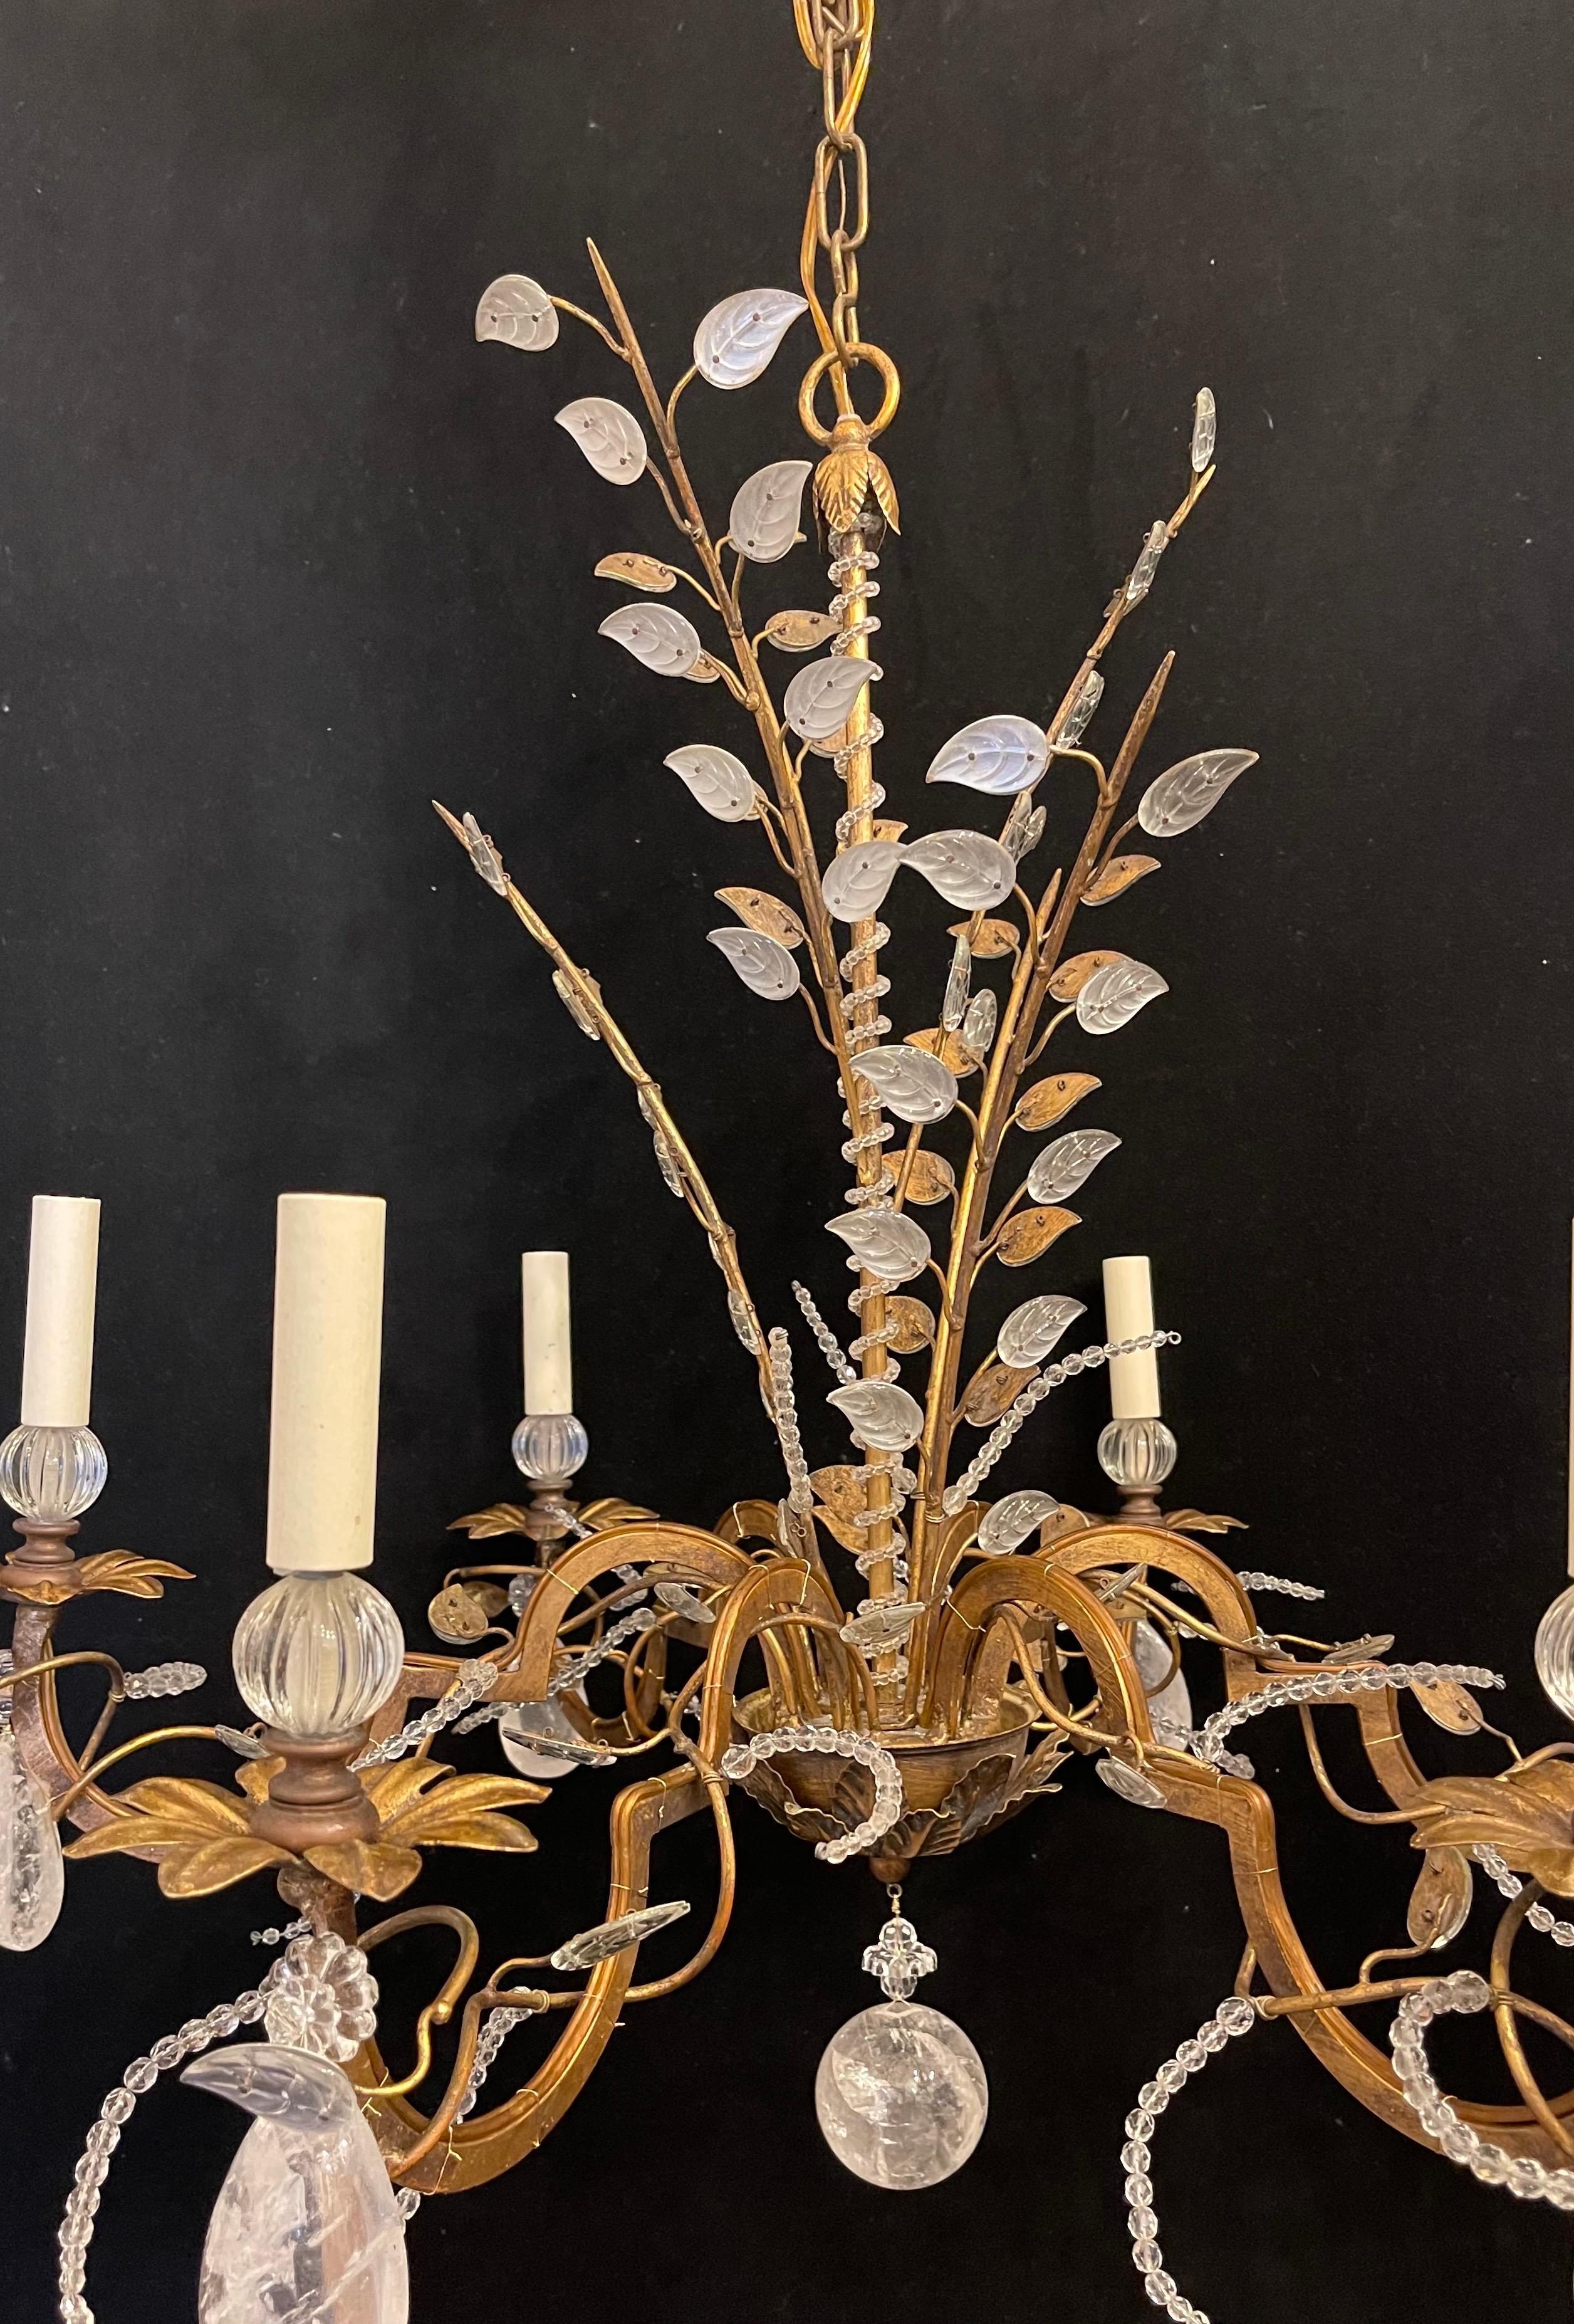 A Beautiful Gold Gilt With Rock Crystal And Crystal Leaf Basket Spray Form Chandelier By Vaughan Designs England, In The Manner Of Maison Baguès & Jansen With 6 Candelabra Lights Each Taking A Max Of 40 Watts Per Socket.